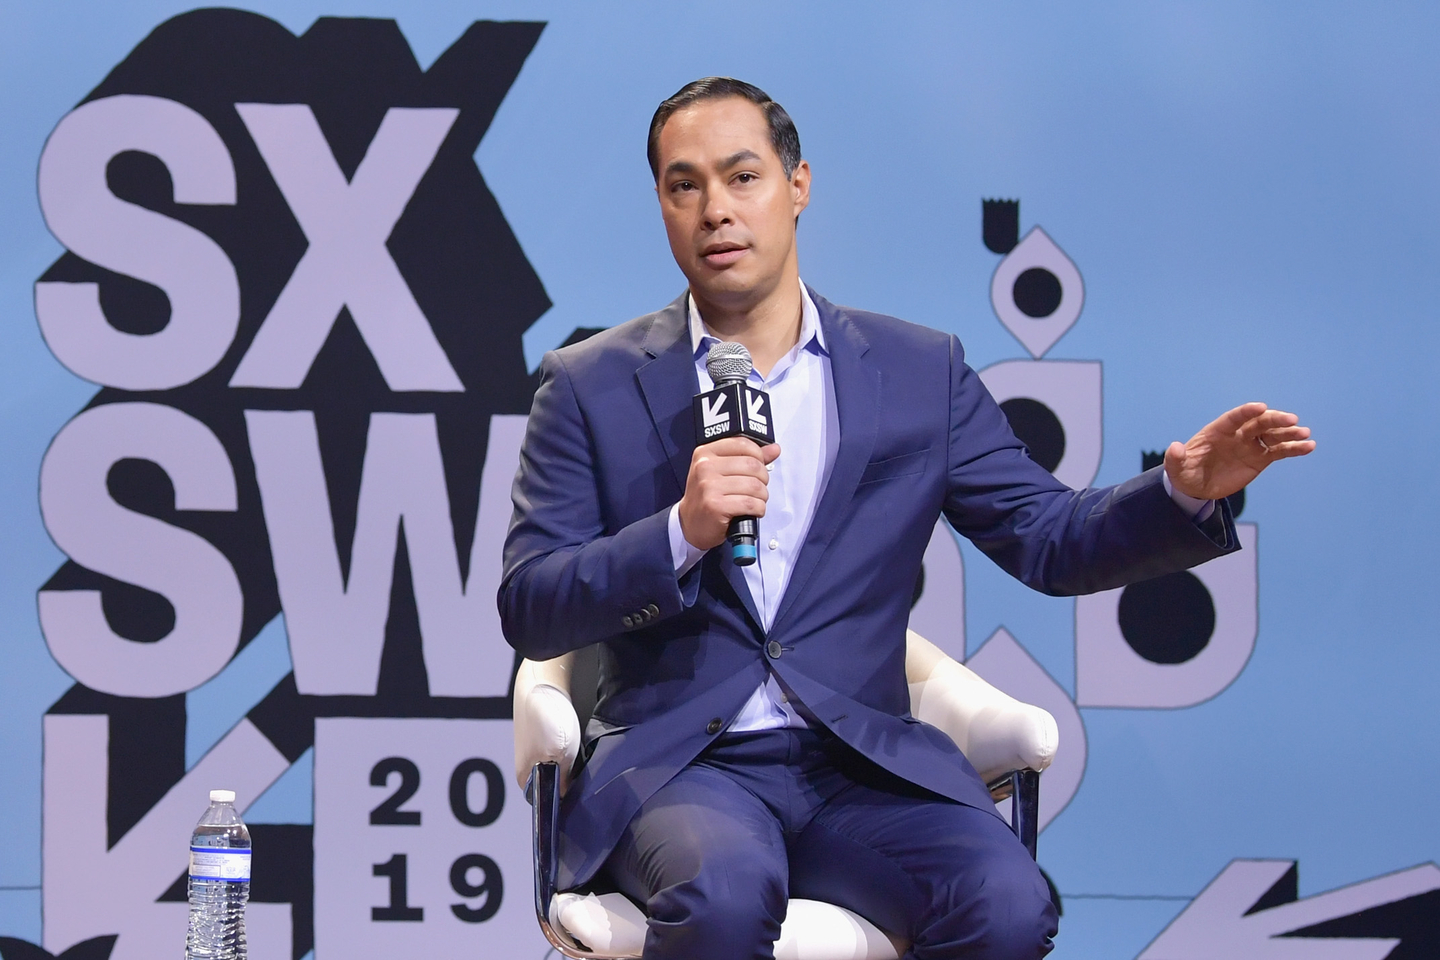 Former U.S. Secretary of Housing & Urban Development Julián Castro speaks onstage at Conversations About America's Future at Austin City Limits Live at the Moody Theater.